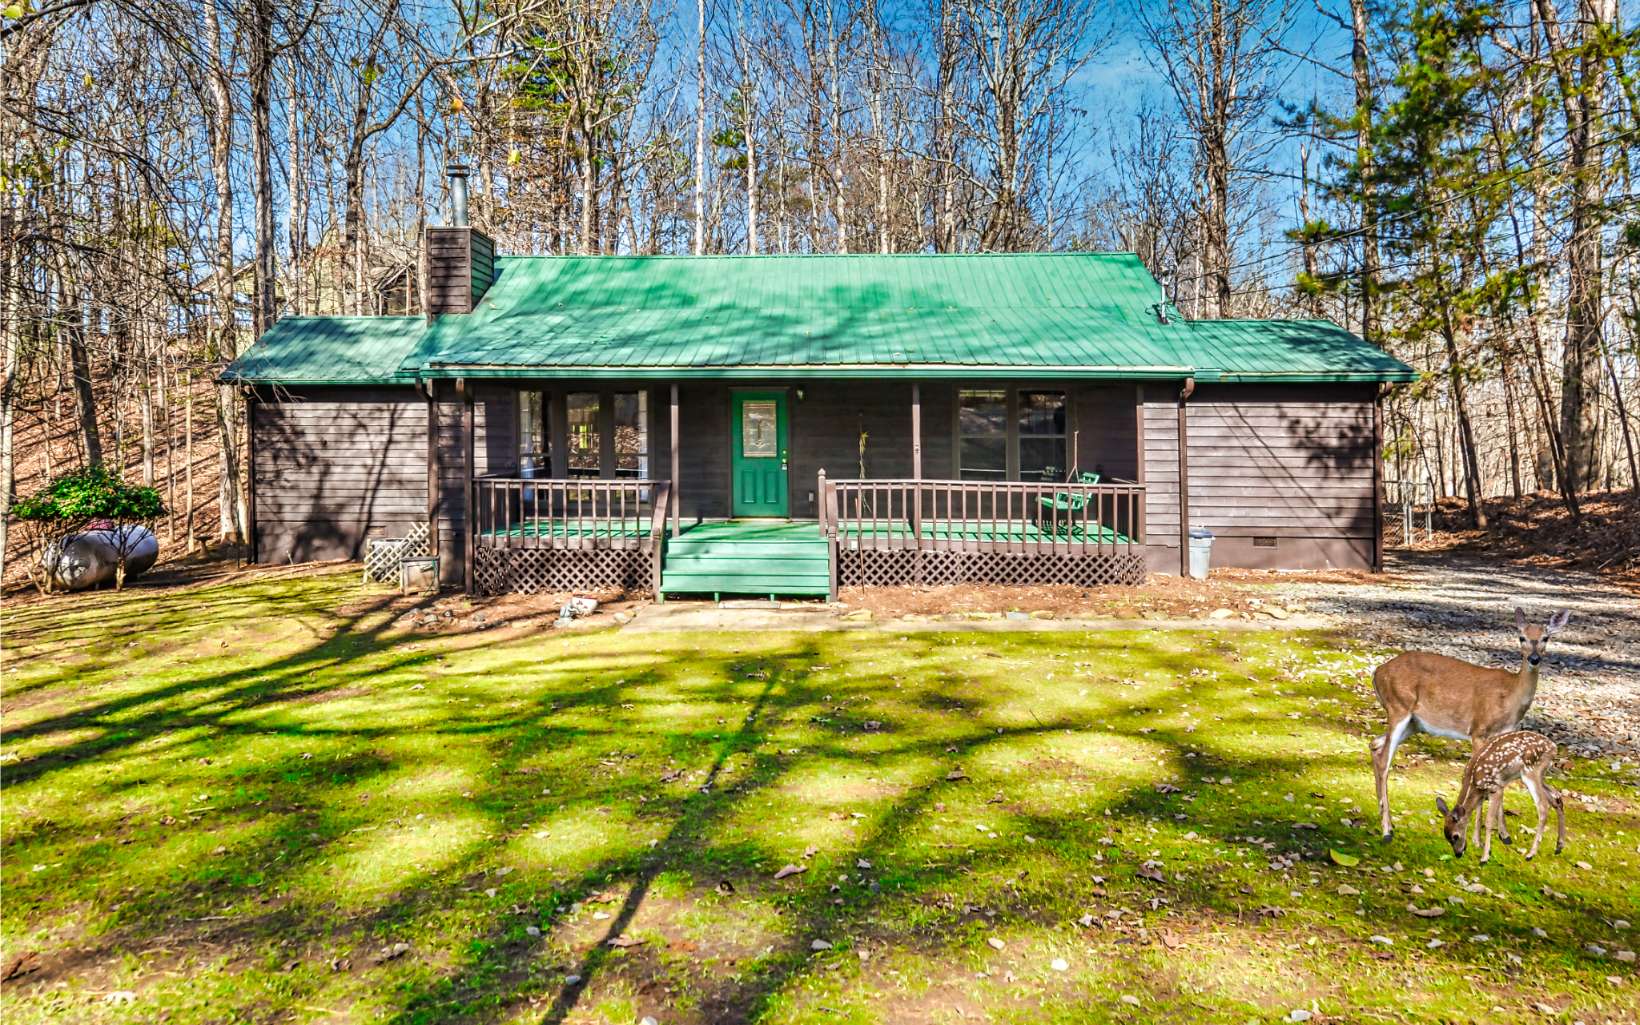 Quaint and cozy cabin nestled in Coosawattee River Resort! This spacious home sits on a level/gentle lot of 1.04 acres - ample acreage for a home in this resort and sits back off the road for lots of privacy! The front porch is perfect for overlooking all the wildlife that will stop by. Boasting 2 bedrooms/2 bathrooms (large master bath), an open living room connecting to the kitchen, 2 fireplaces, granite countertops, stainless steel appliances, hardwood floors through the main living area, a den with lots of potential uses, a 28x14 finished workshop, and much more! This cabin is within minutes from shopping, dining, and only 5 miles to downtown Ellijay! Perfect for full time living or an investment as a short term rental! As a plus you’ll get to enjoy all of the resort's great amenities!!